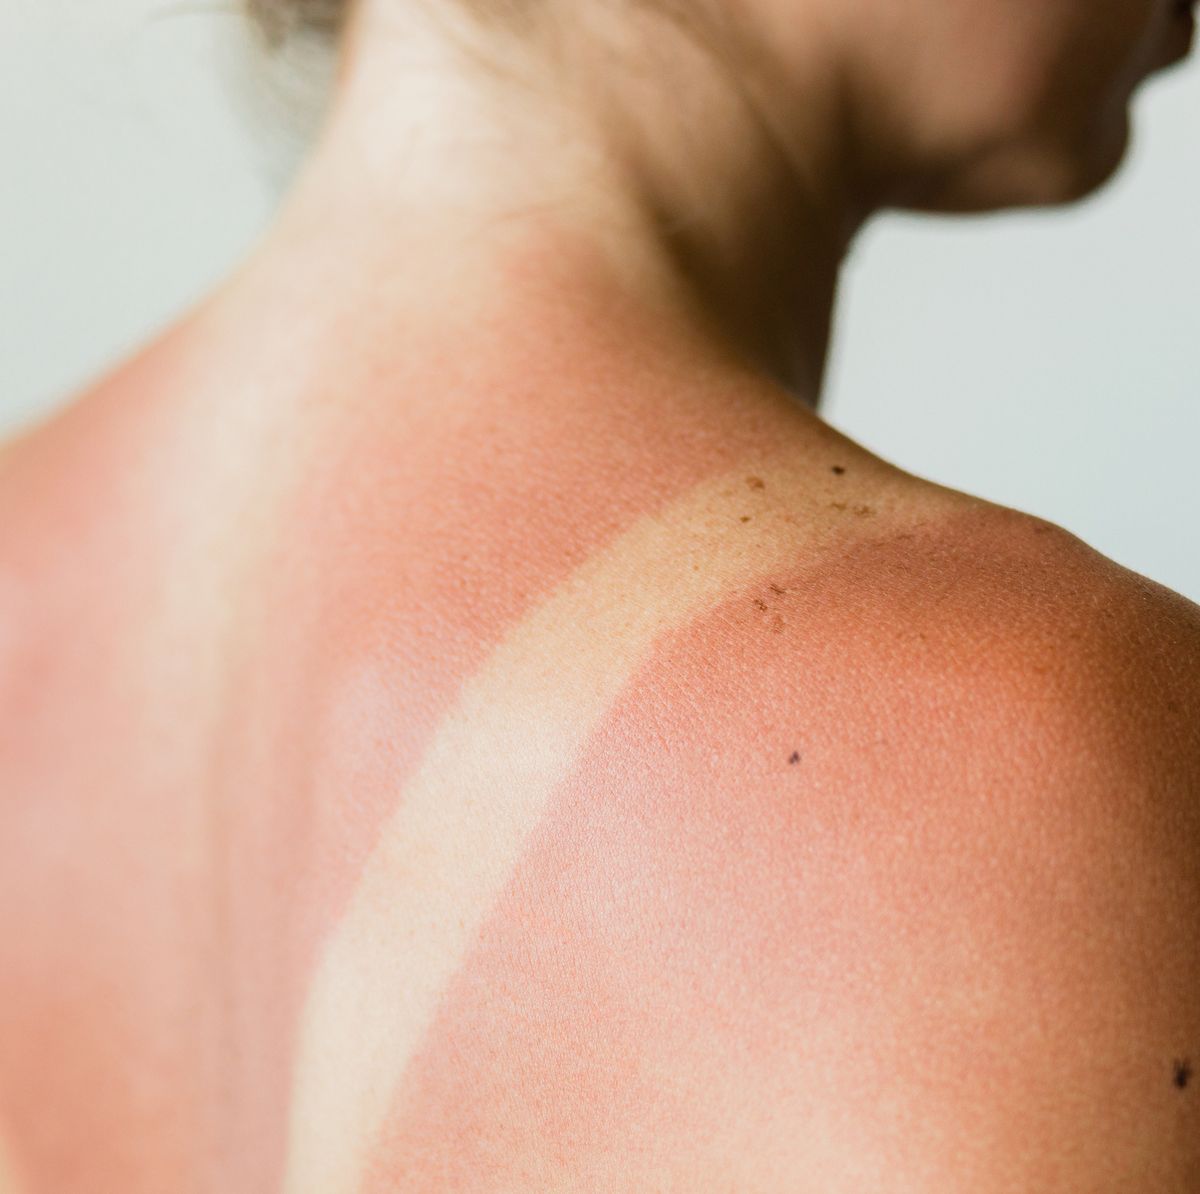 Treating a Sunburn with Home Remedies